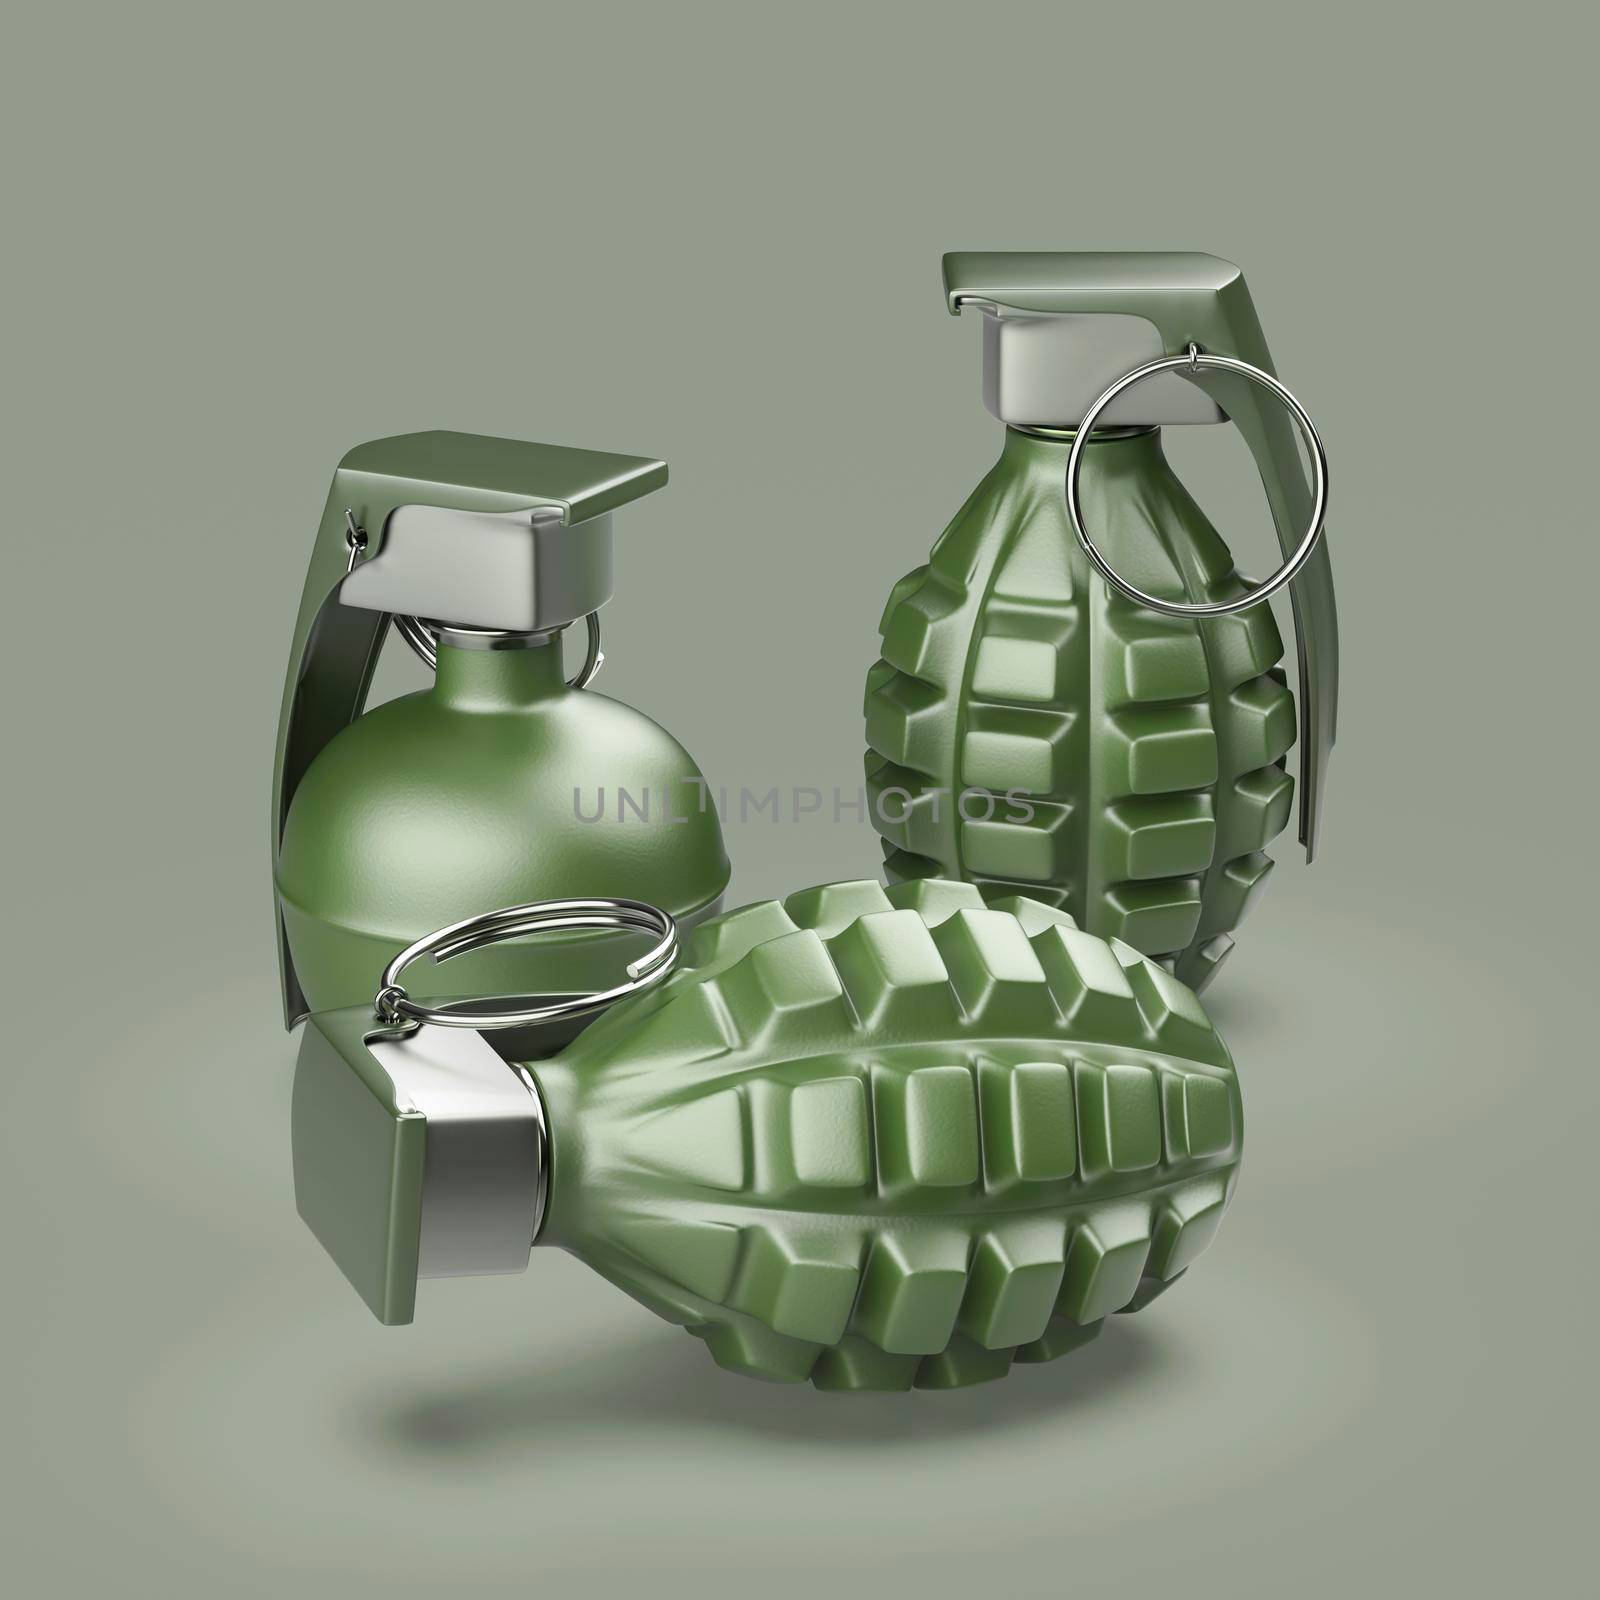 Hand grenades by magraphics